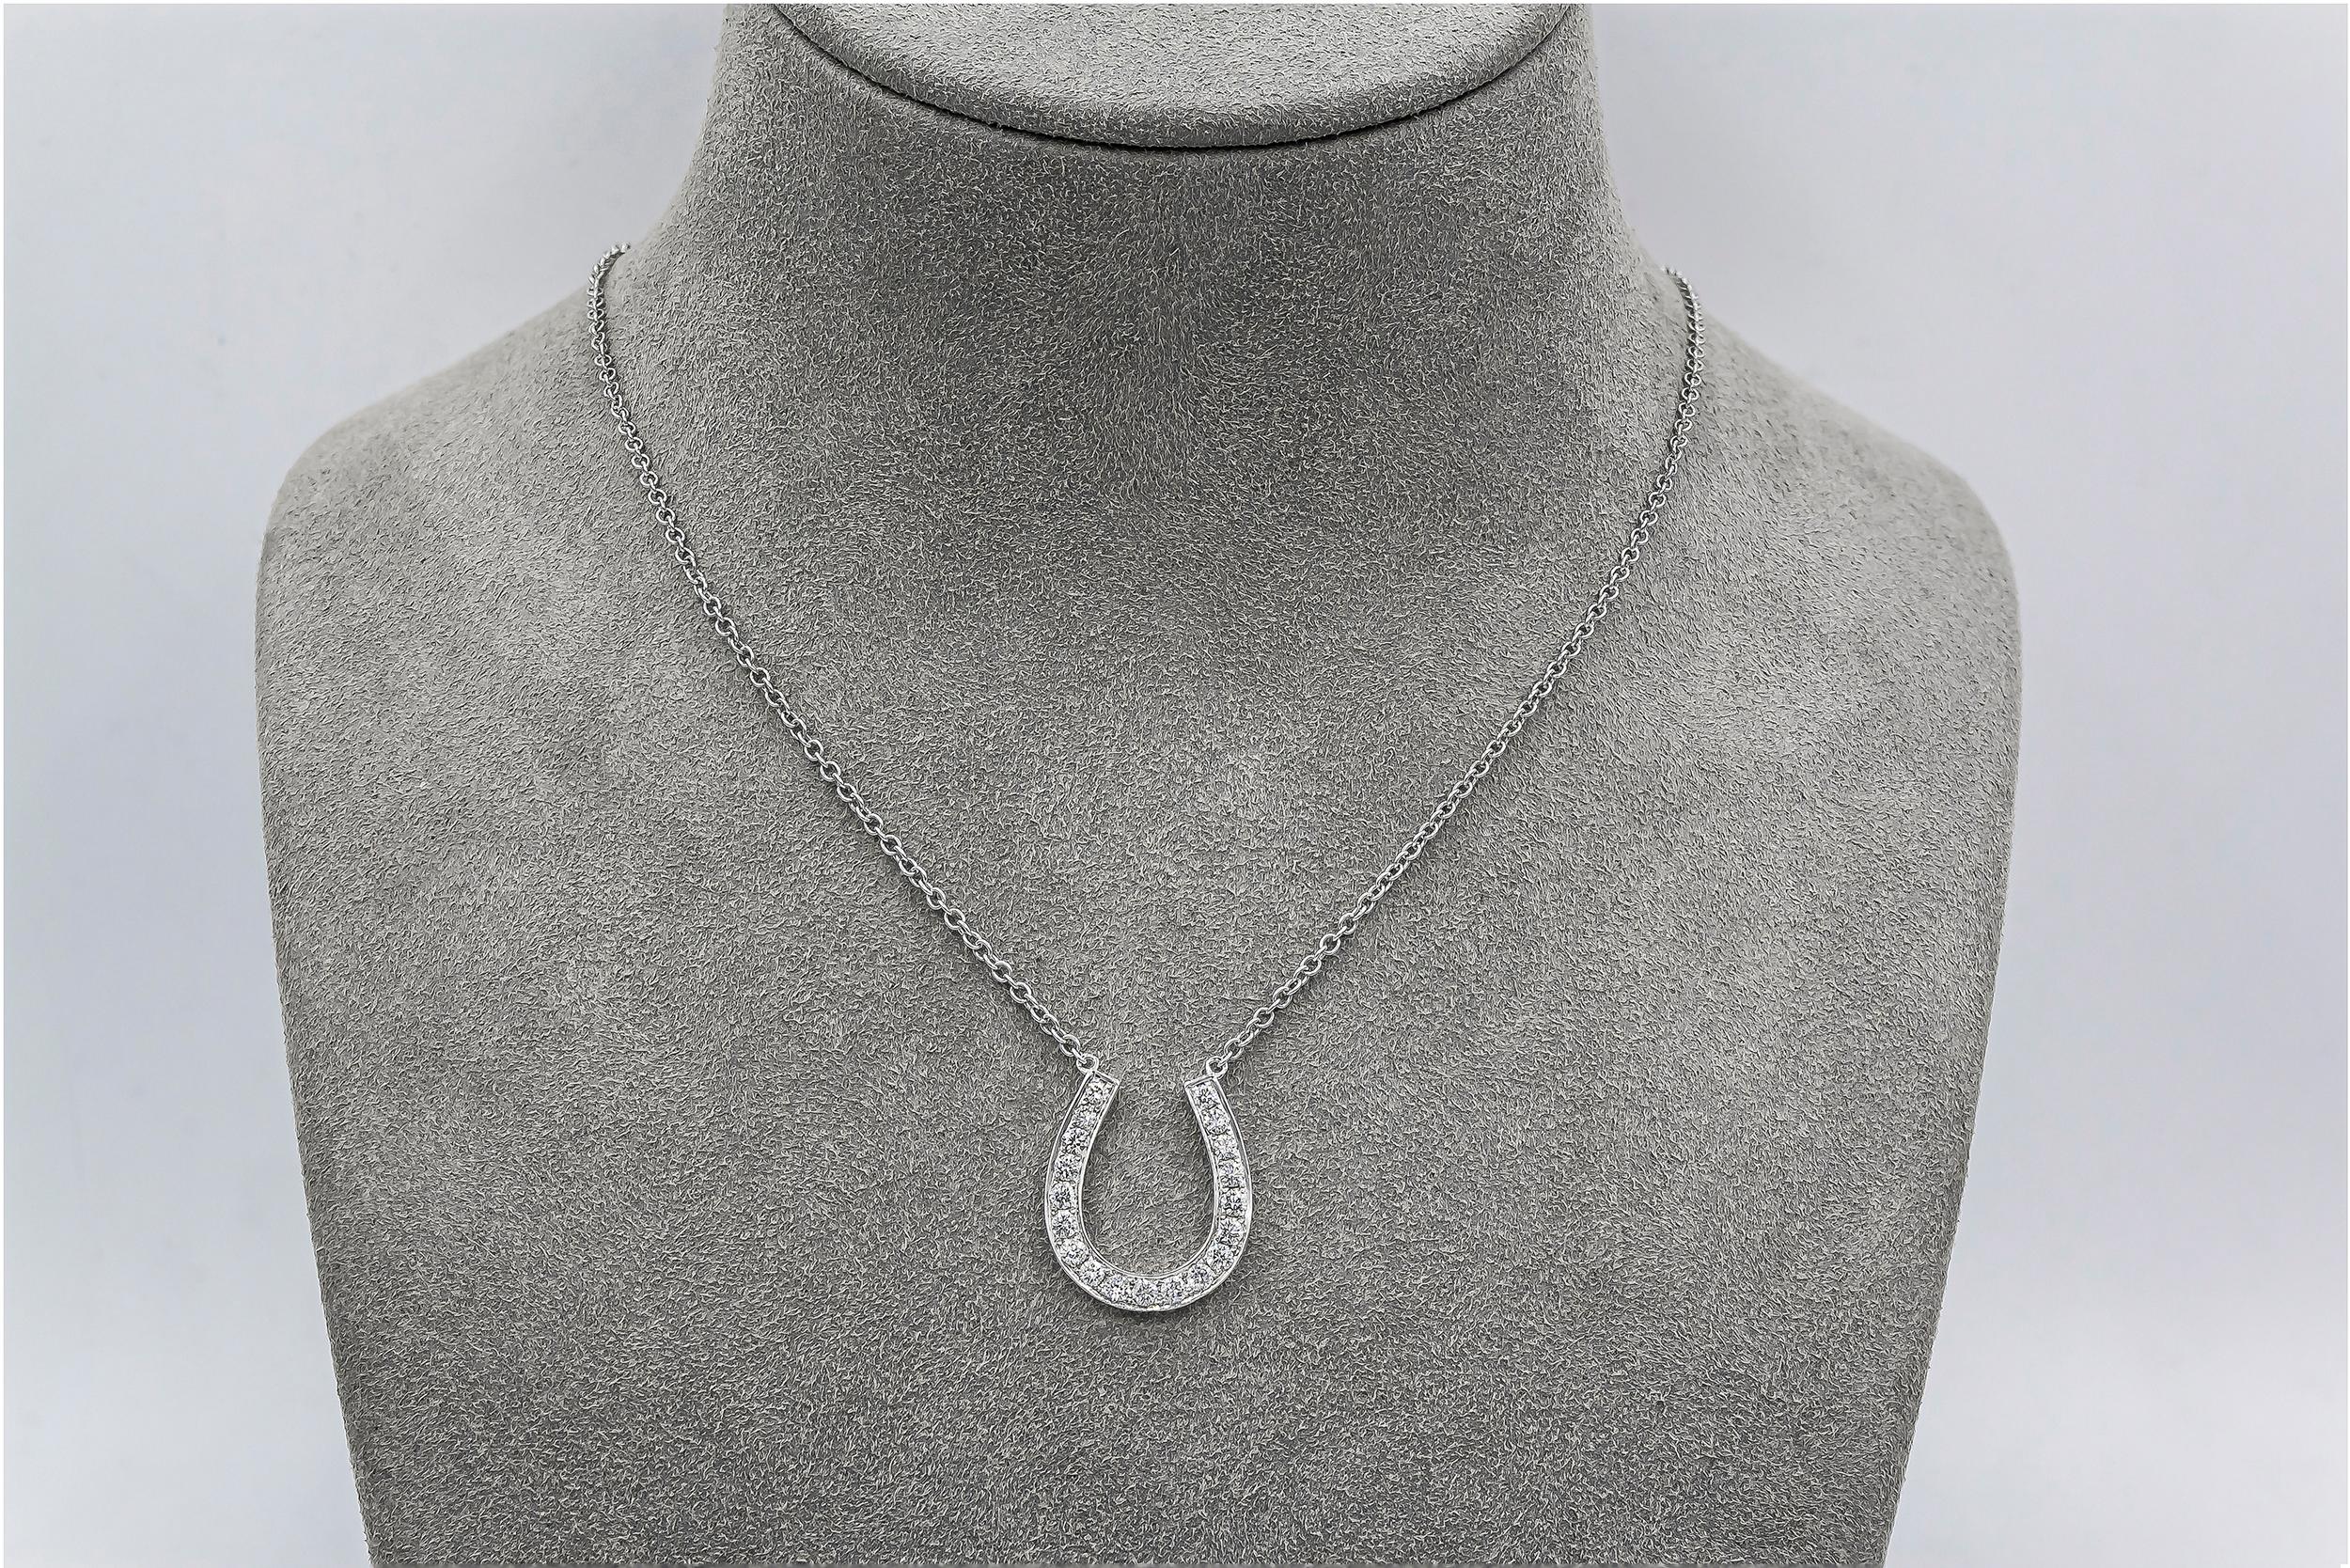 Showcasing round brilliant diamonds set in a unique horse shoe design. Diamonds weigh 0.70 carats total. Made in 18K White Gold. Suspended on a 16 inch white gold chain. Perfect for your everyday use or a gift to loved ones. 

Roman Malakov is a